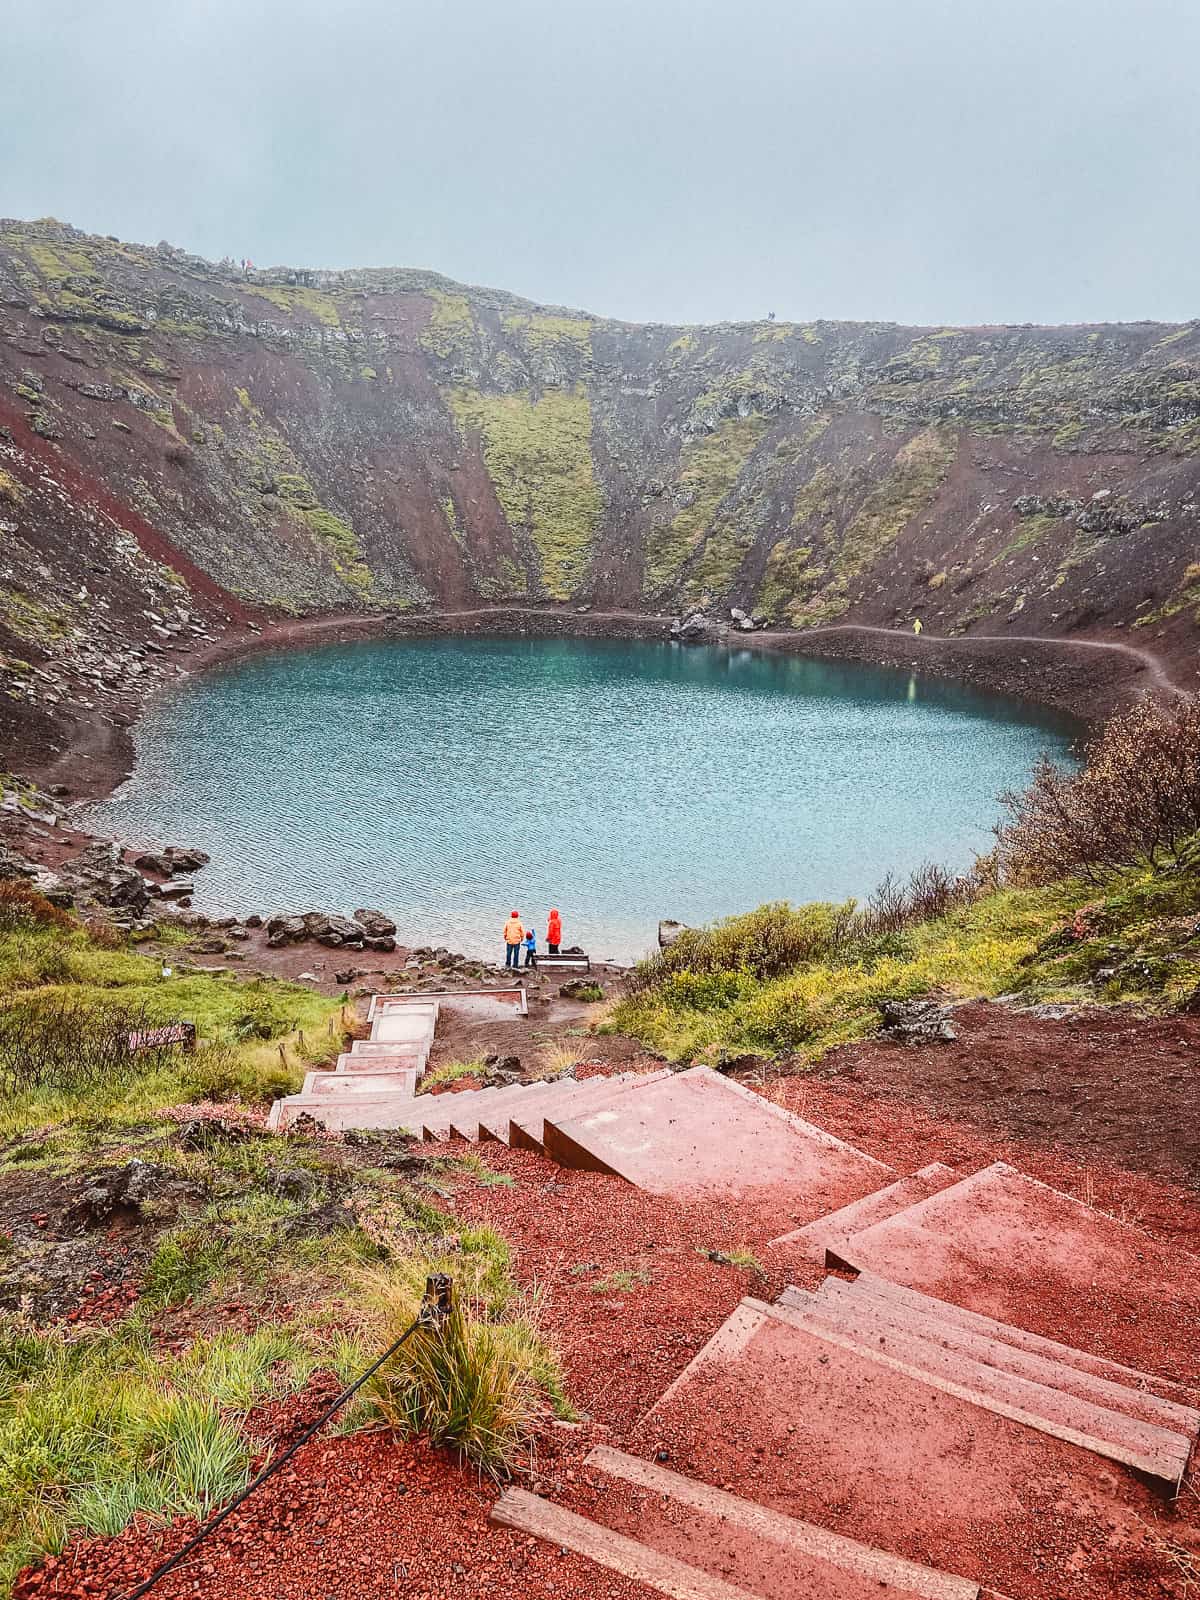 Descending steps leading to a serene volcanic crater lake in Iceland with lush green moss-covered slopes under a misty sky, with two hikers in bright jackets standing by the water's edge, enhancing the tranquil yet vibrant scene.